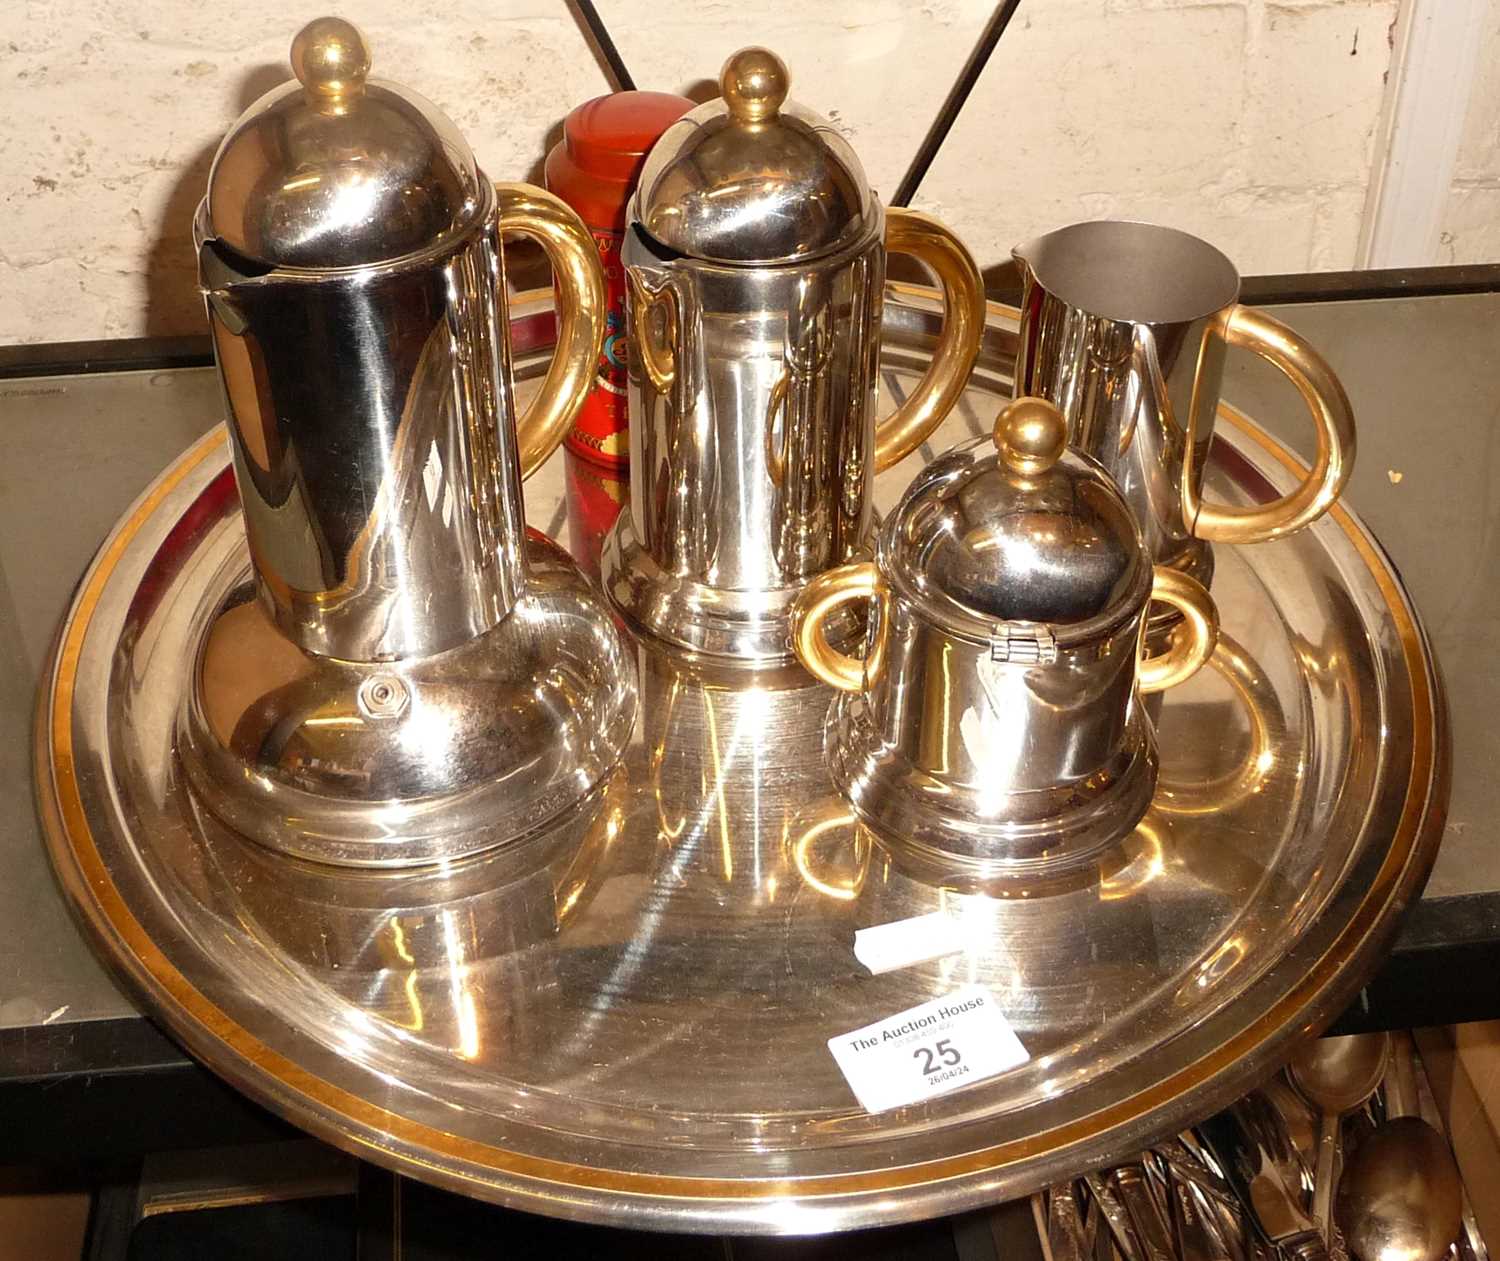 Vintage designer stainless steel Inoxpran 18/10 Orchidea coffee set, with tray and perculator,